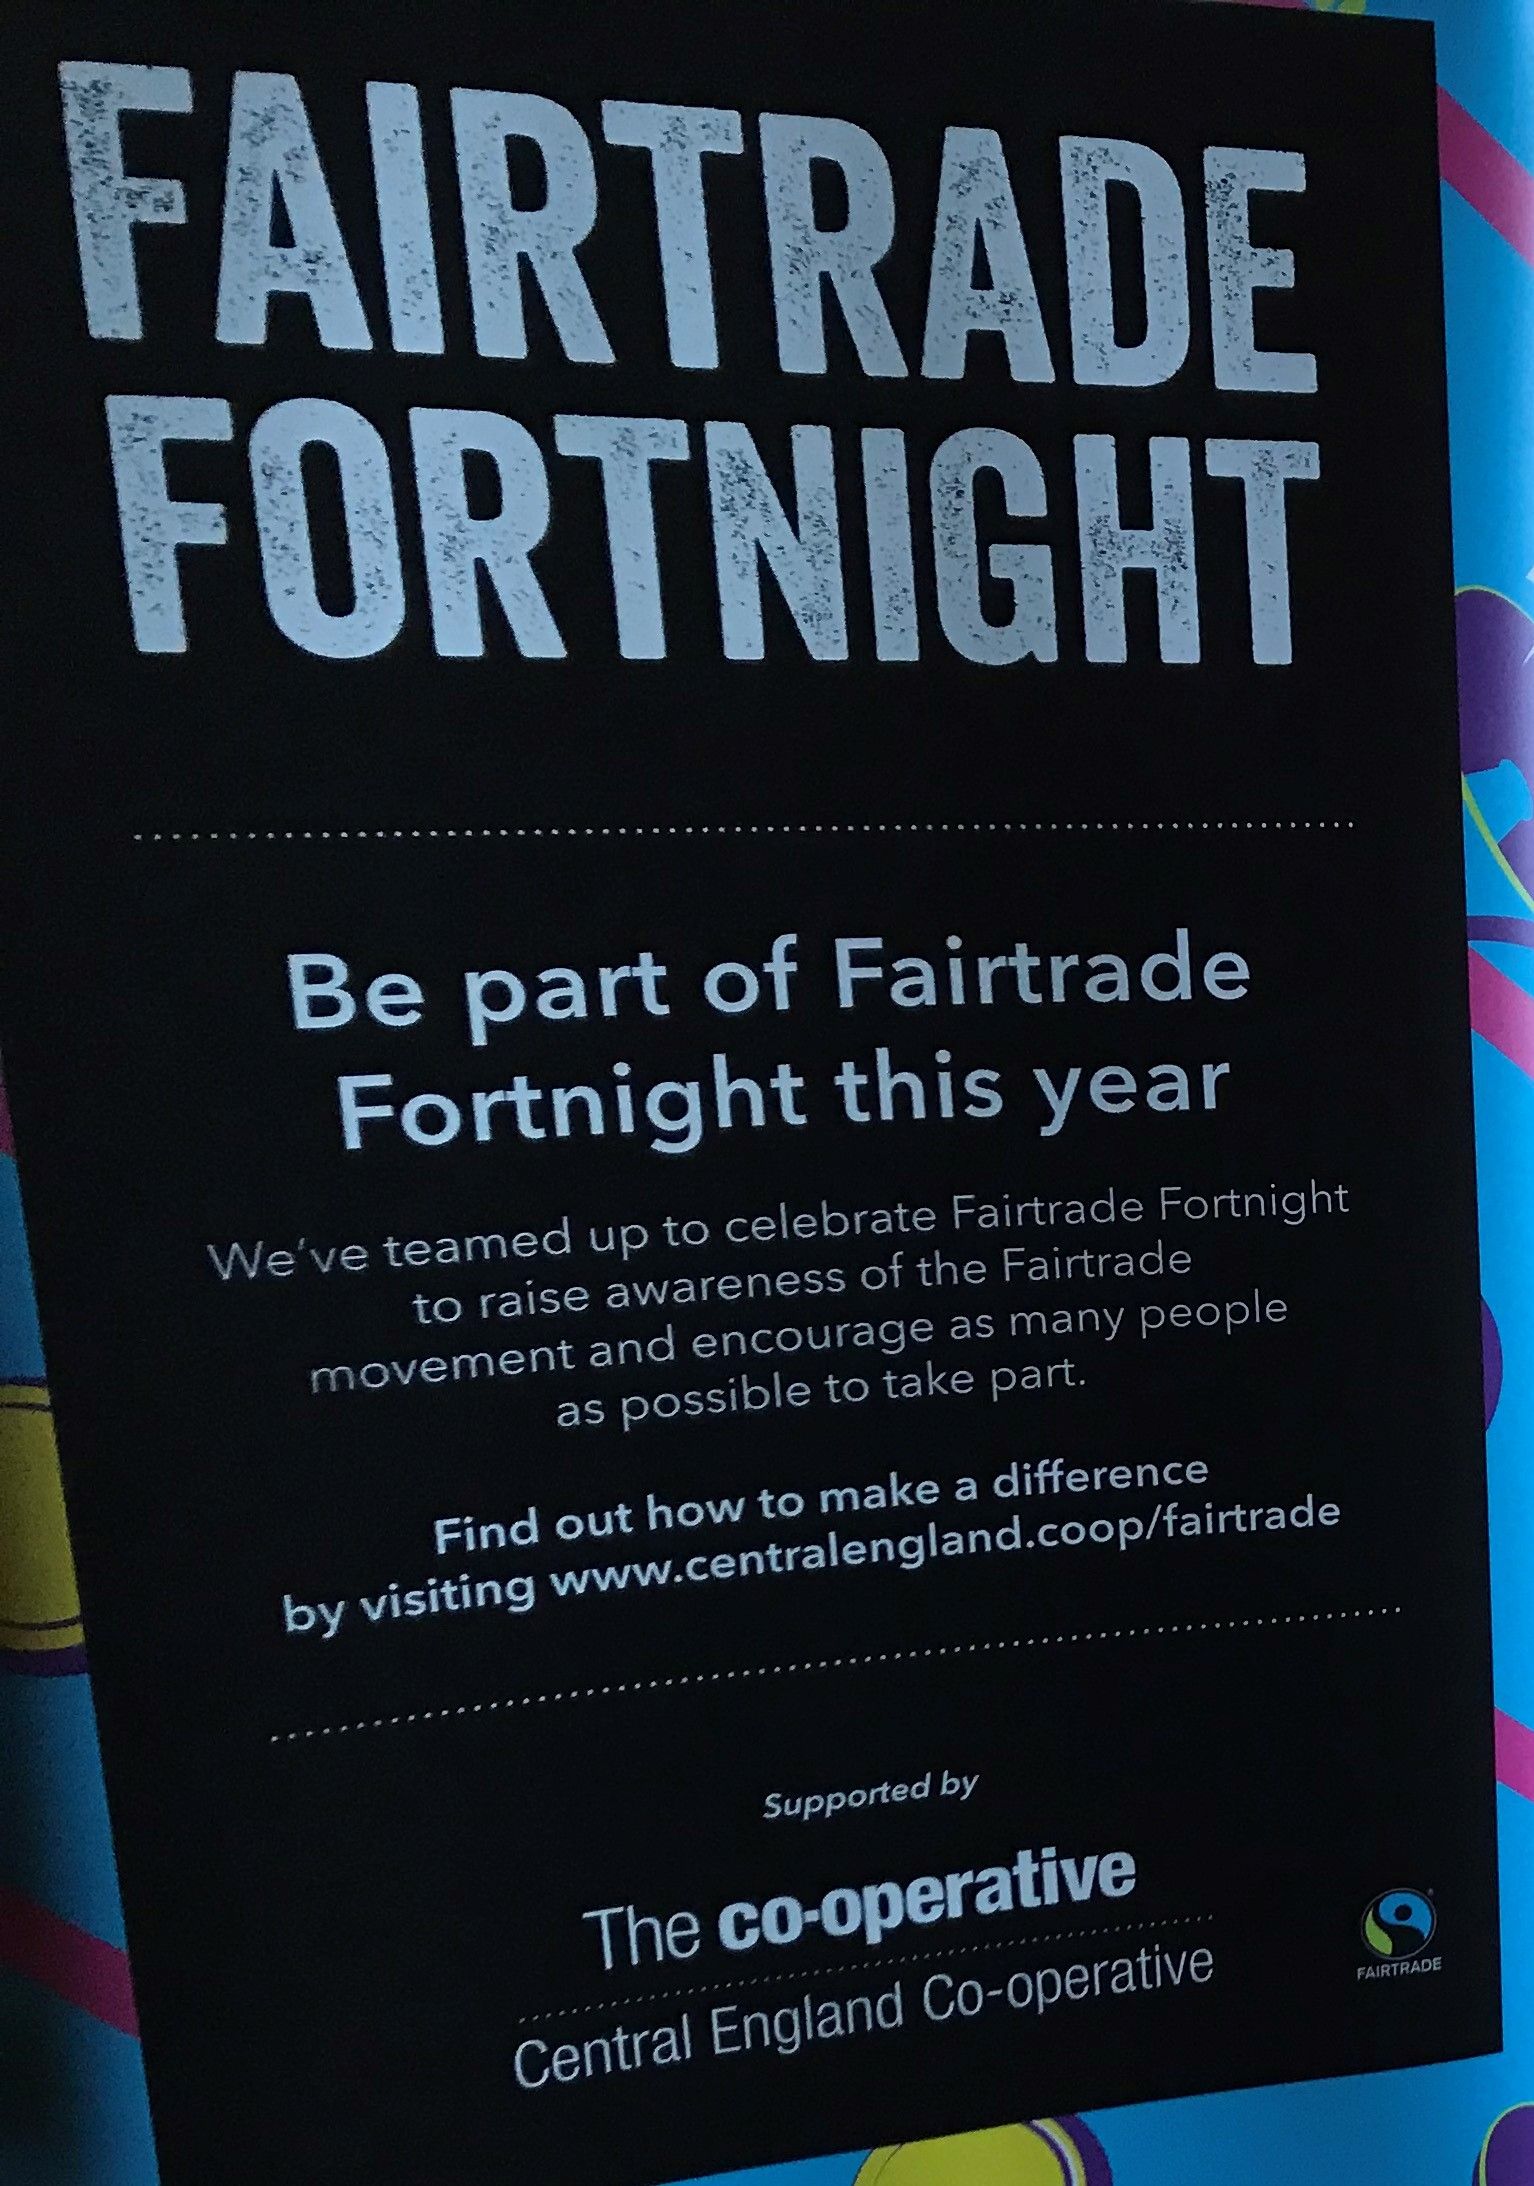 Week one of Fairtrade Fortnight activity in the West Midlands